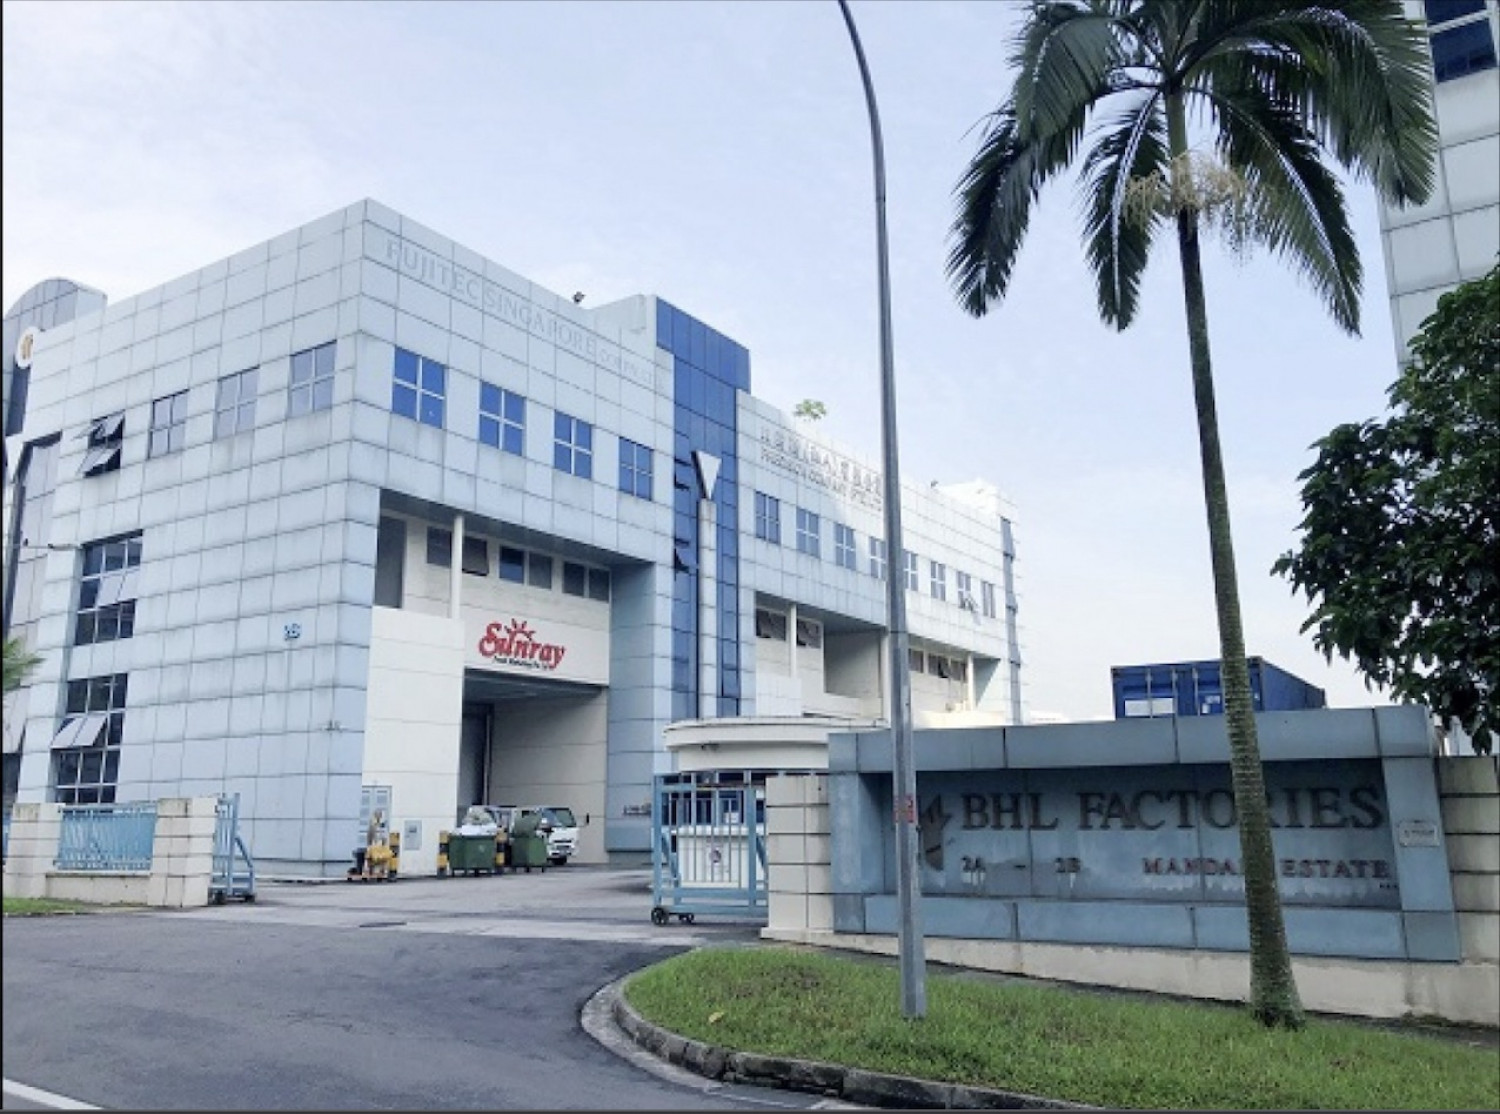 [UPDATE] BHL factories in Mandai Estate sold to Chiu Teng Group for above $130 million, 81% higher than guide price last year - Property News